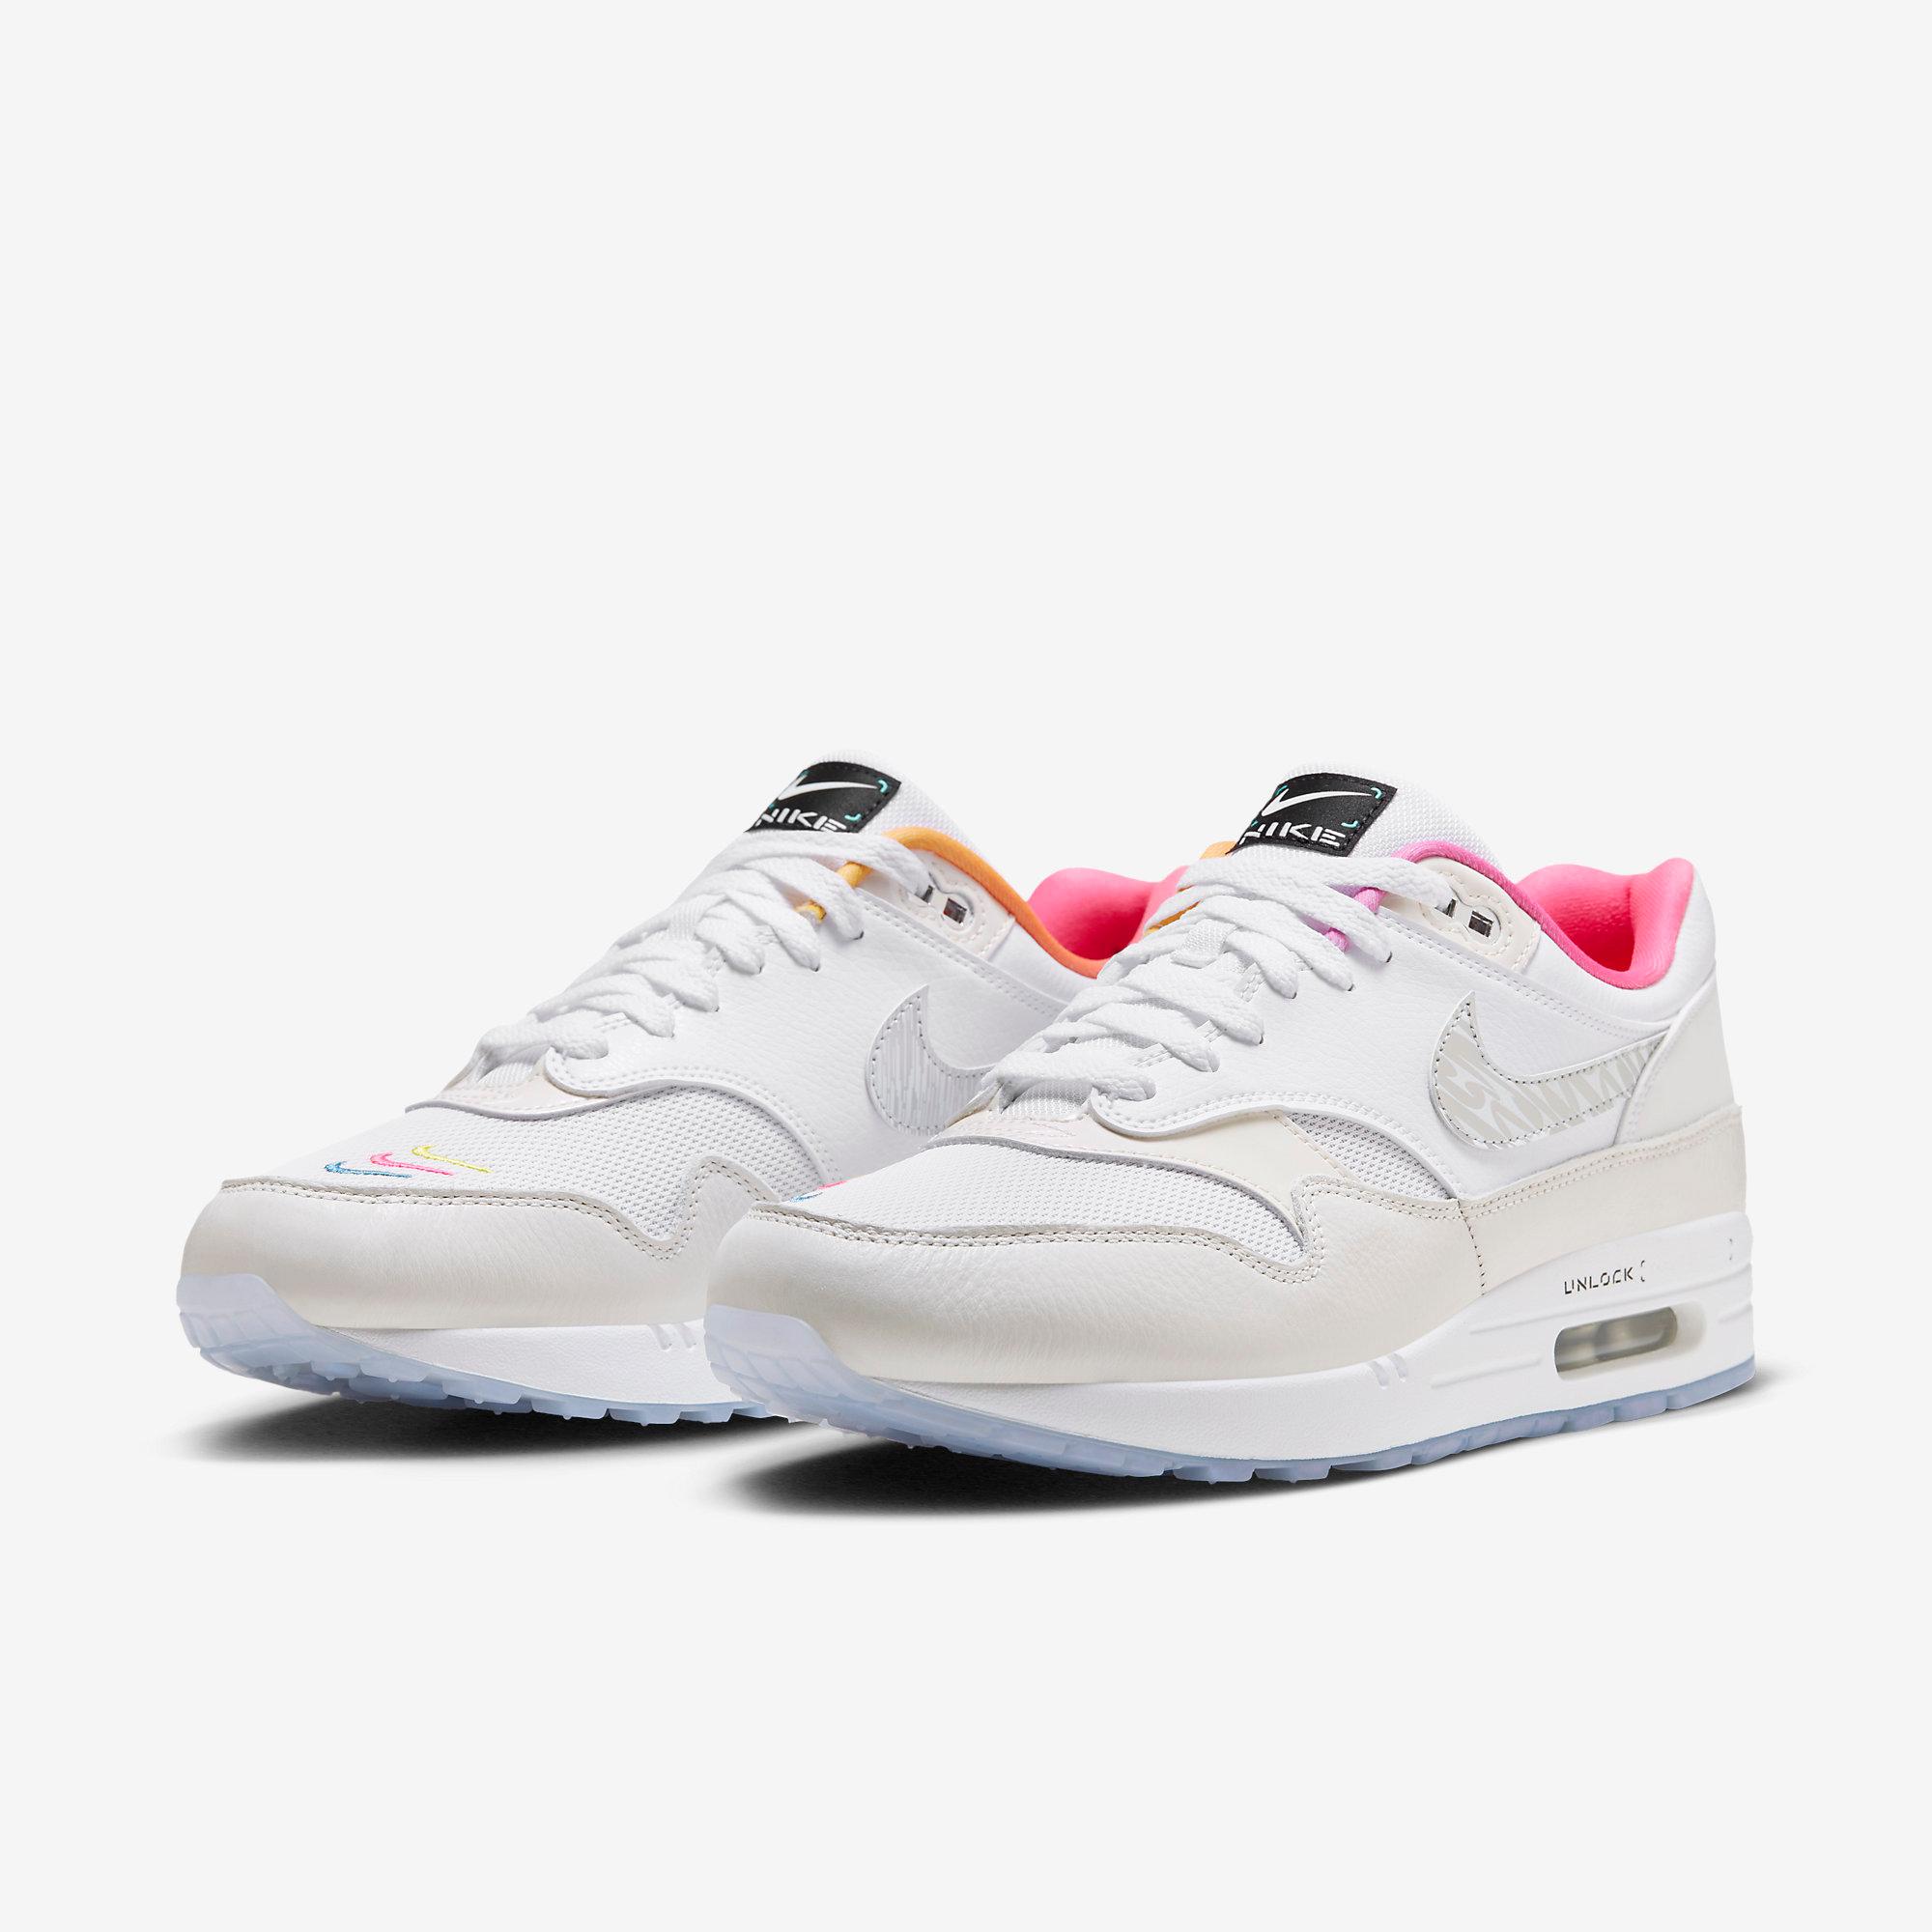 Nike Air Max 1 “Unlock Your Space”